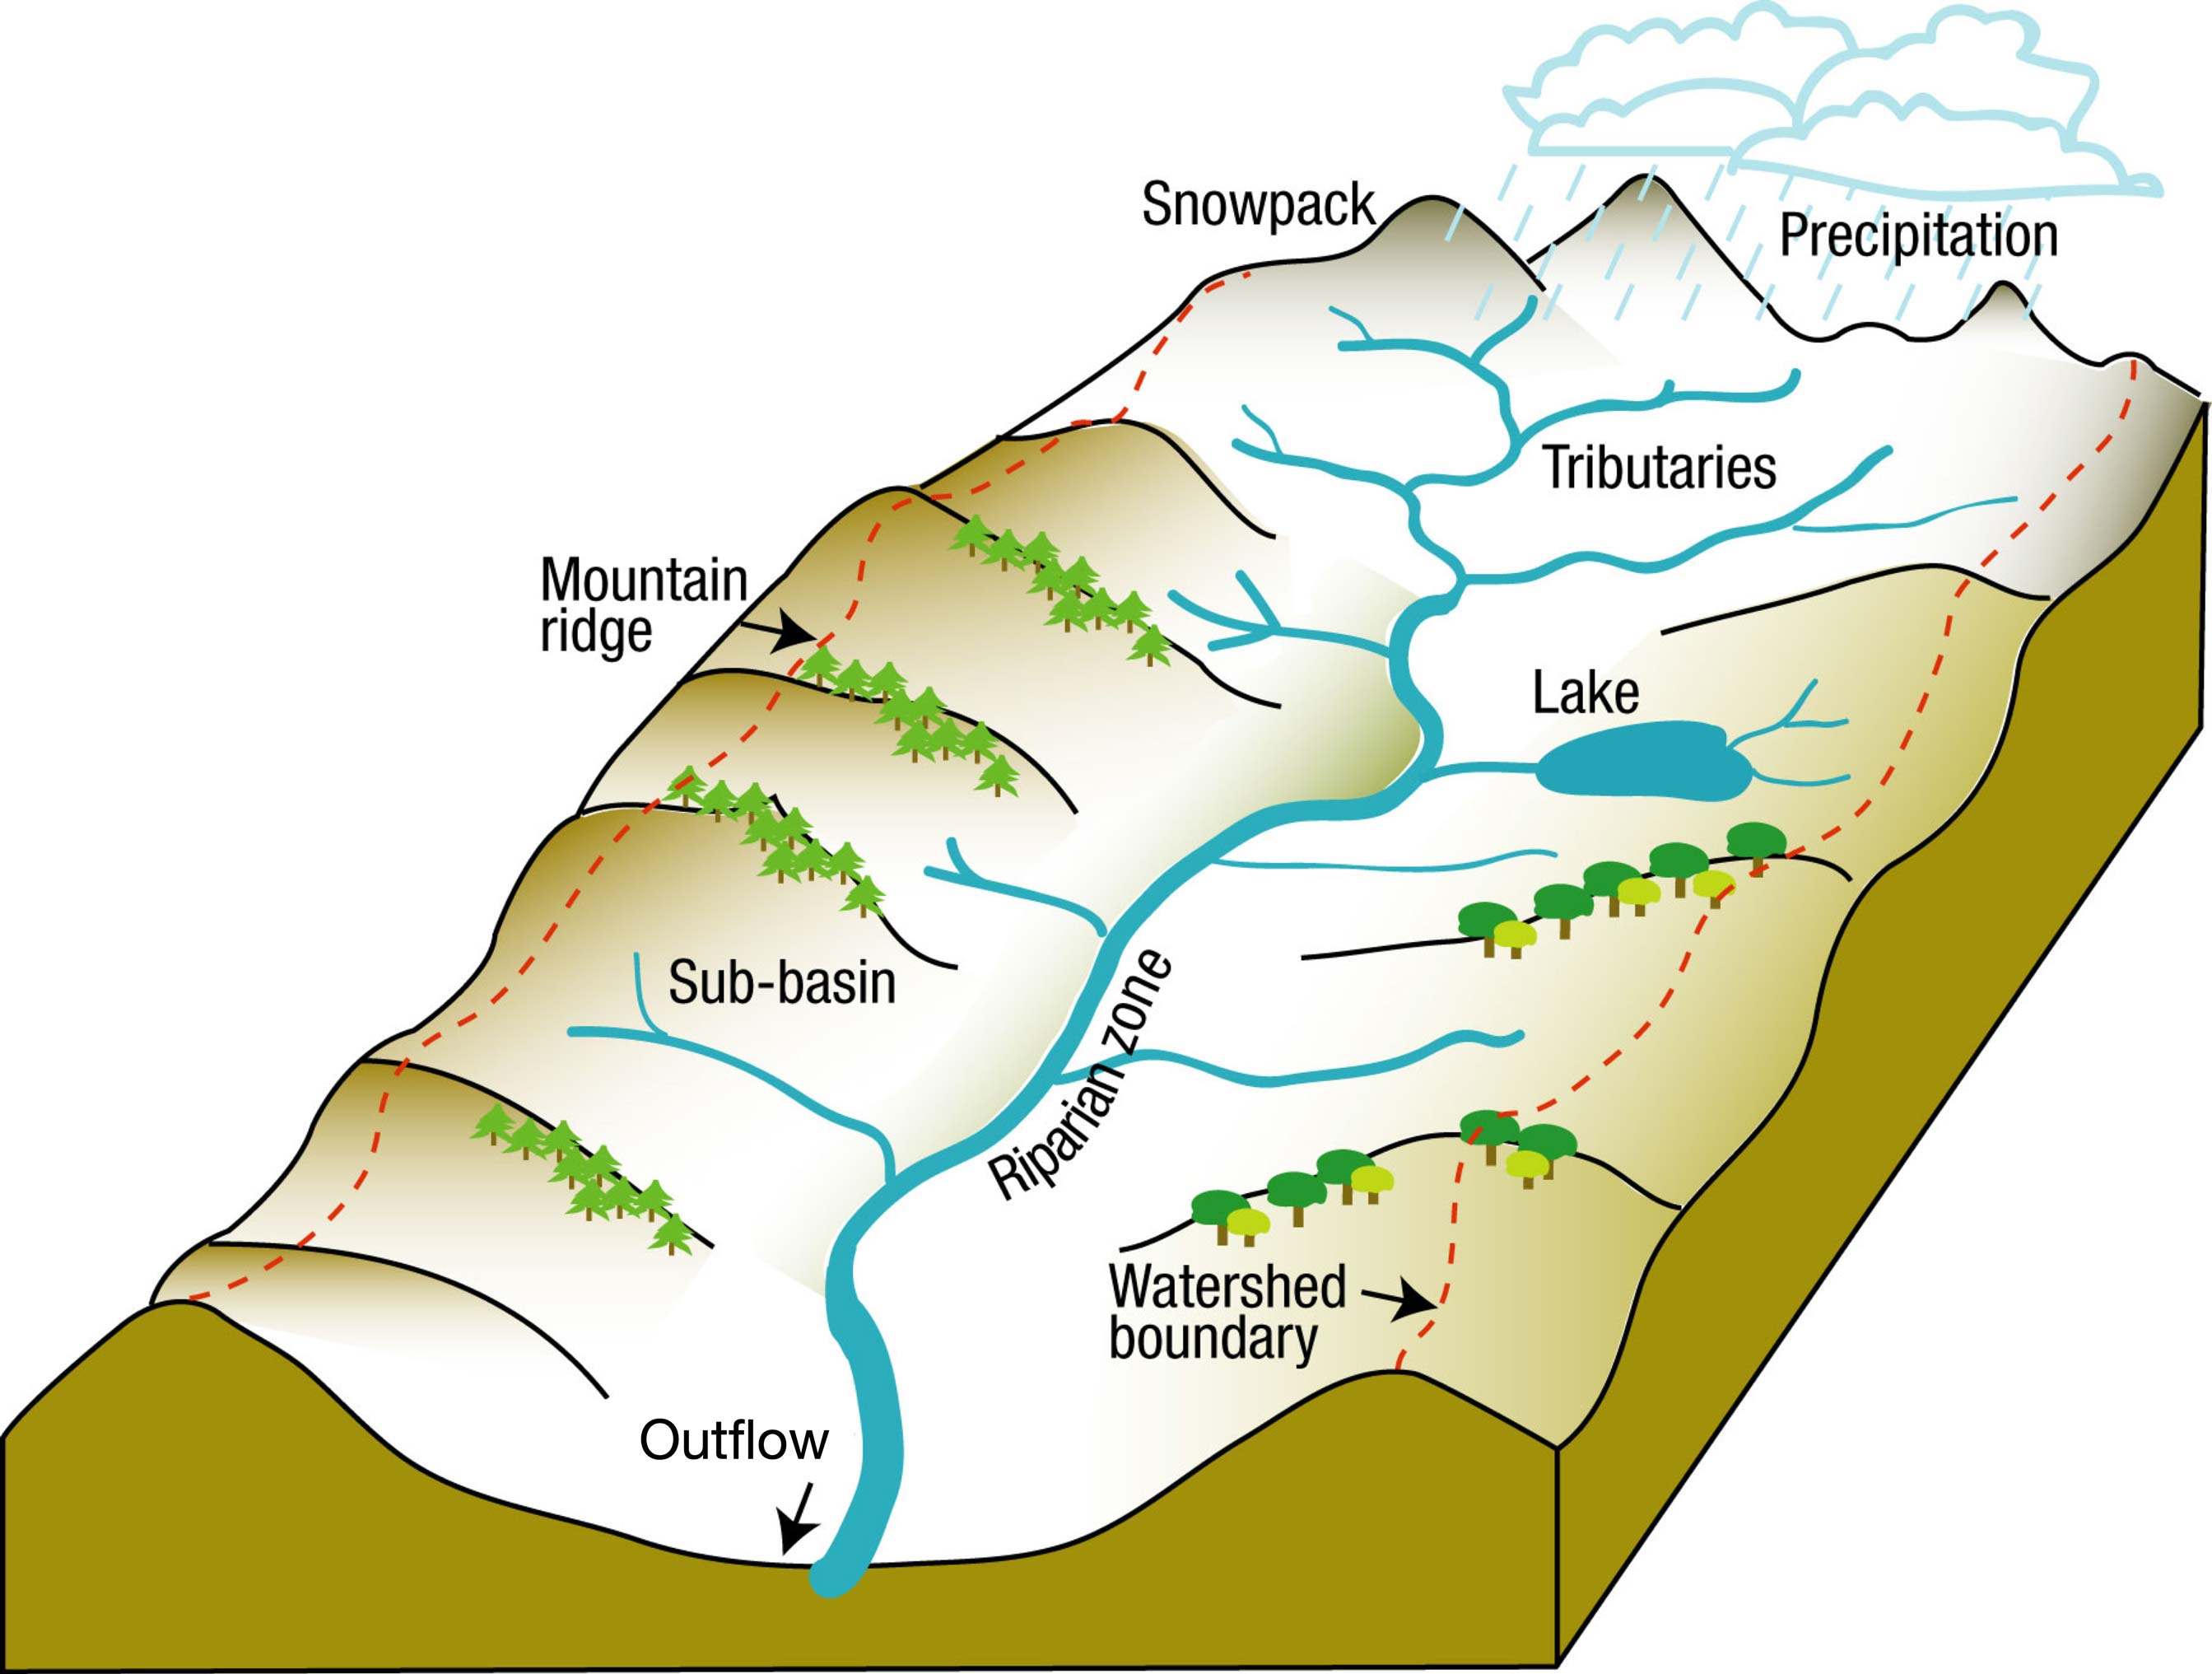 Conceptualized river basin. The red dashed line along the mountain ridges indicate the watershed boundary.